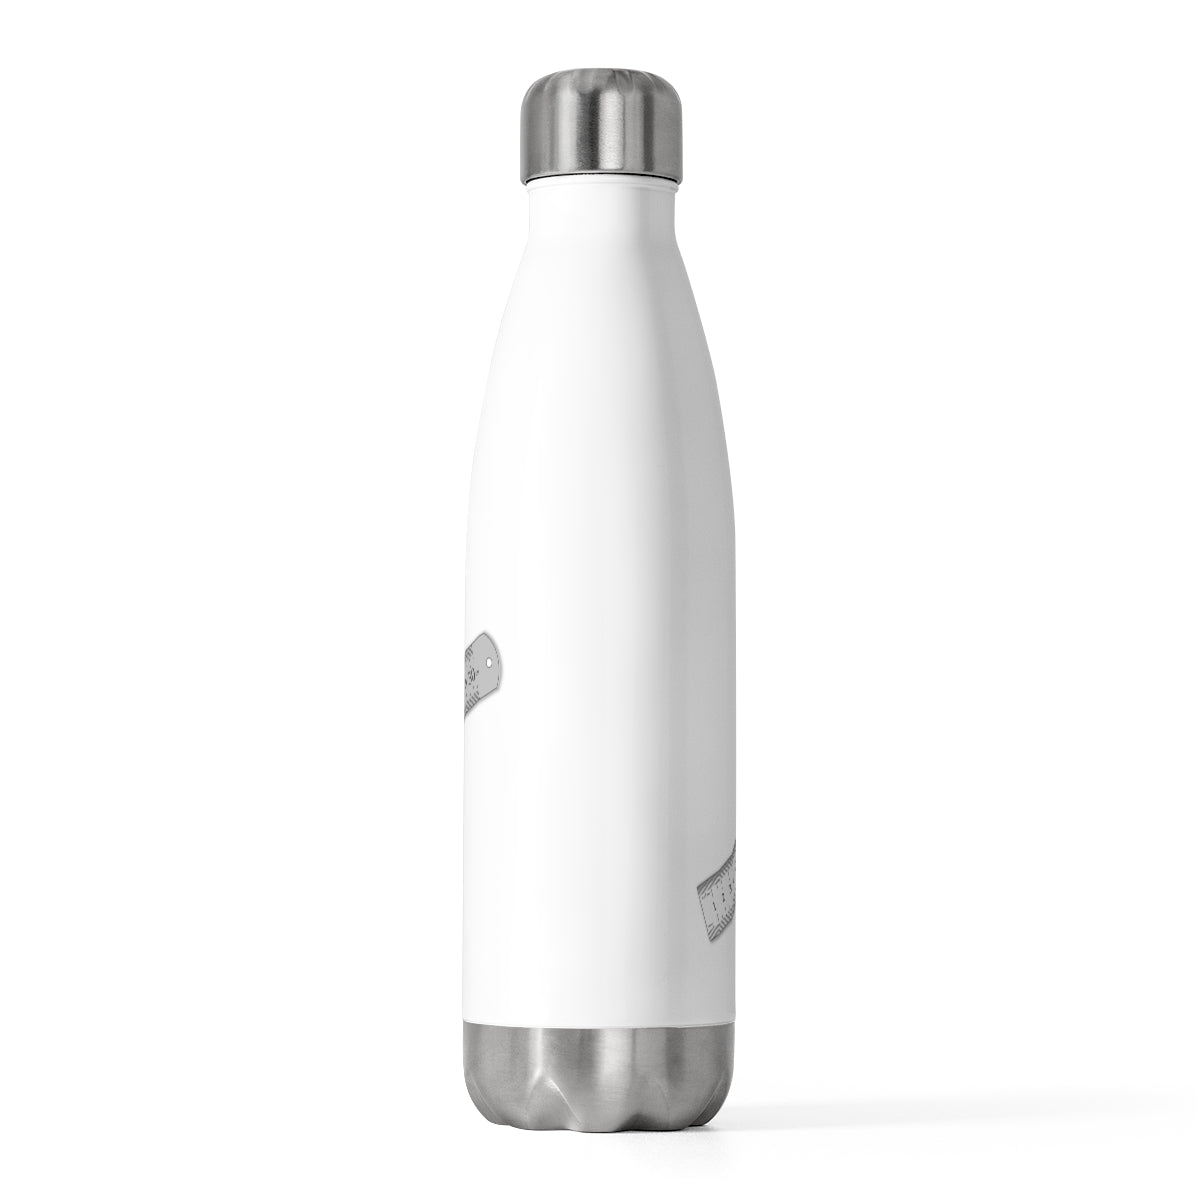 Life's Water Bottle | Provides 4 years of water for 4 People | Impactive 